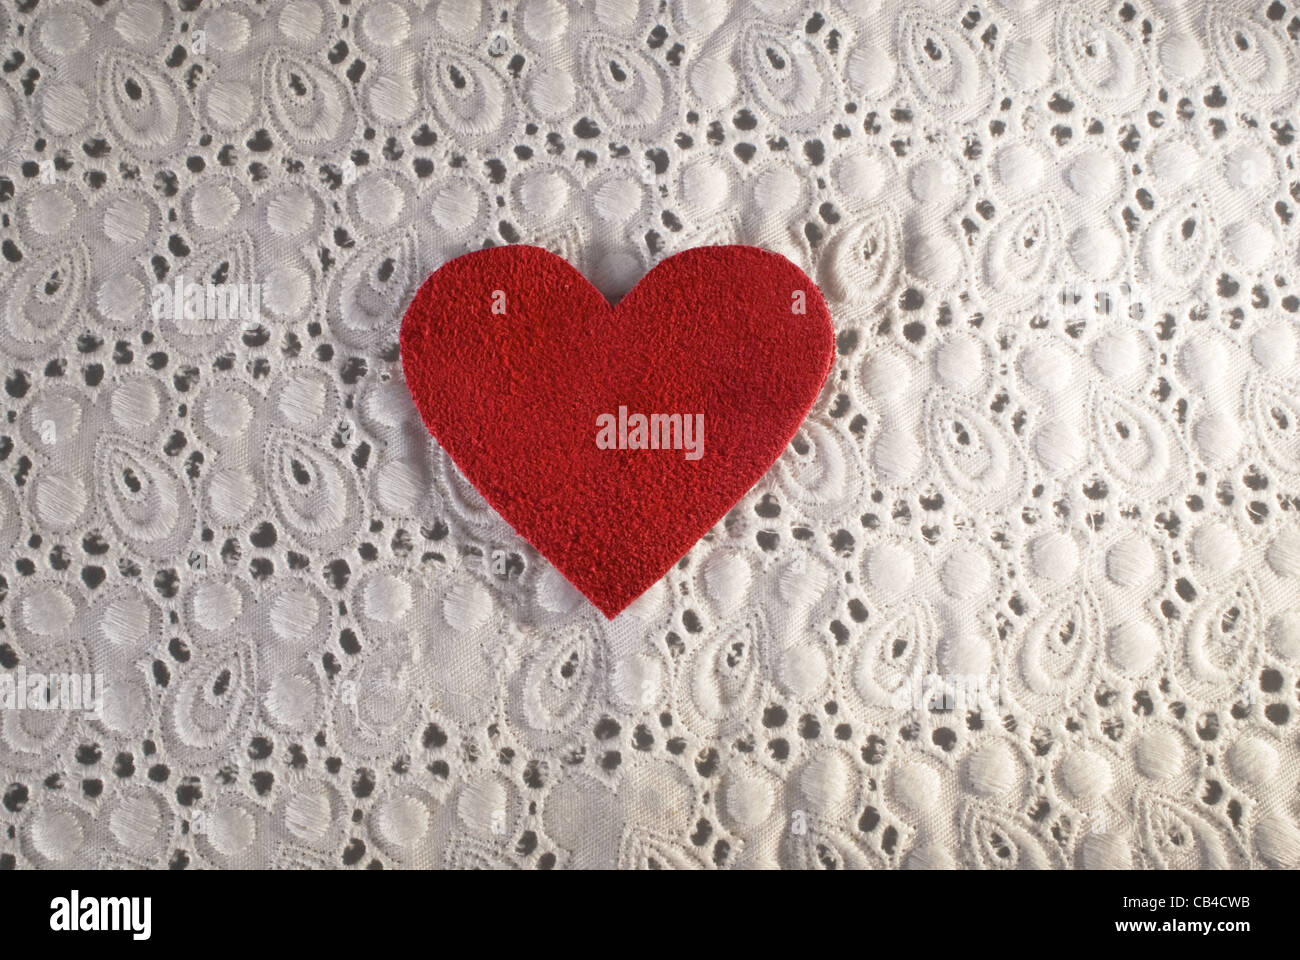 Retro Love. White fabric and red heart shape conceptual composition. Macro texture close up useful as background for design works. Stock Photo